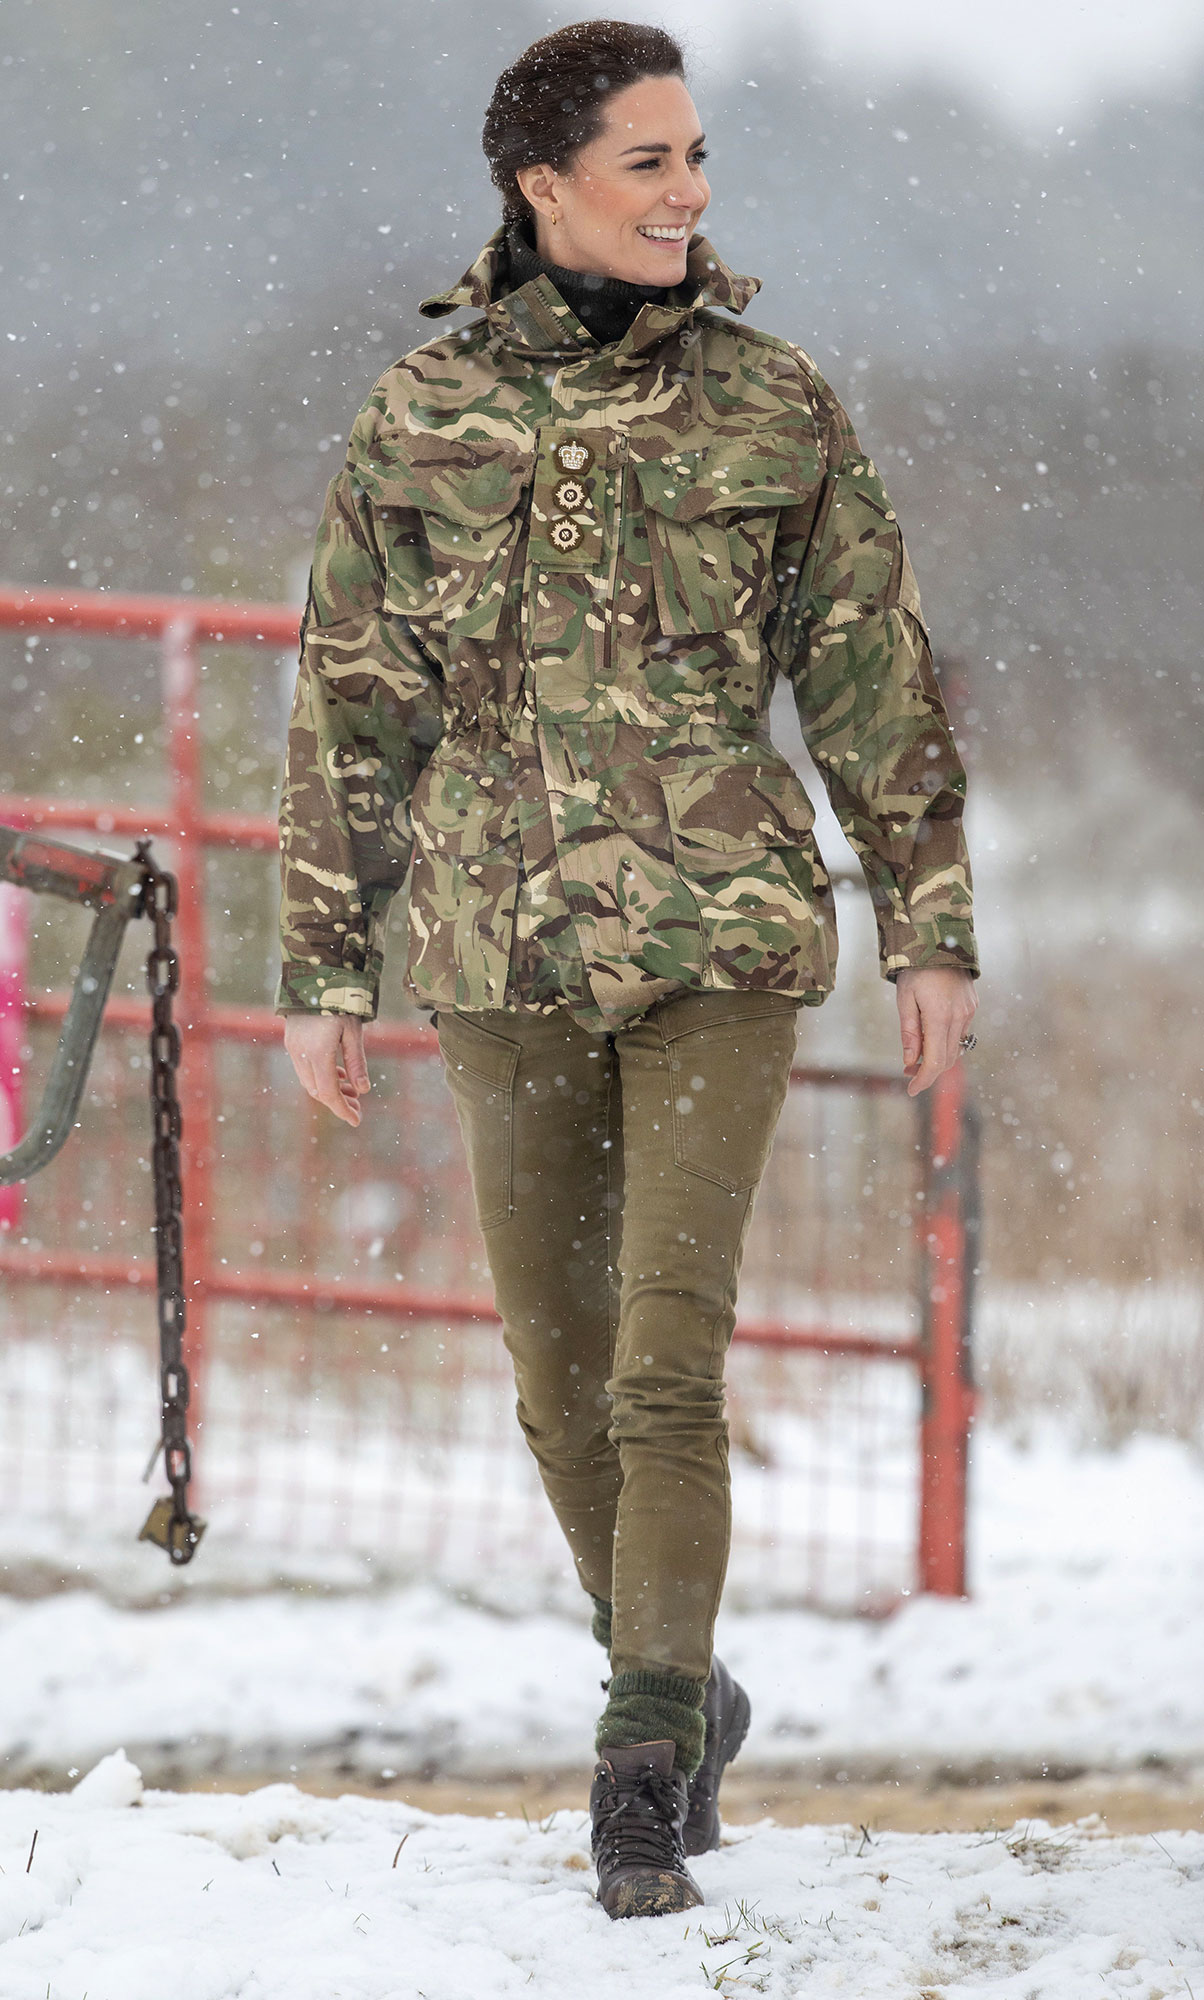 Duchess Kate Middleton Wears Military Camouflage While Participating in Battlefield Training Exercises 9